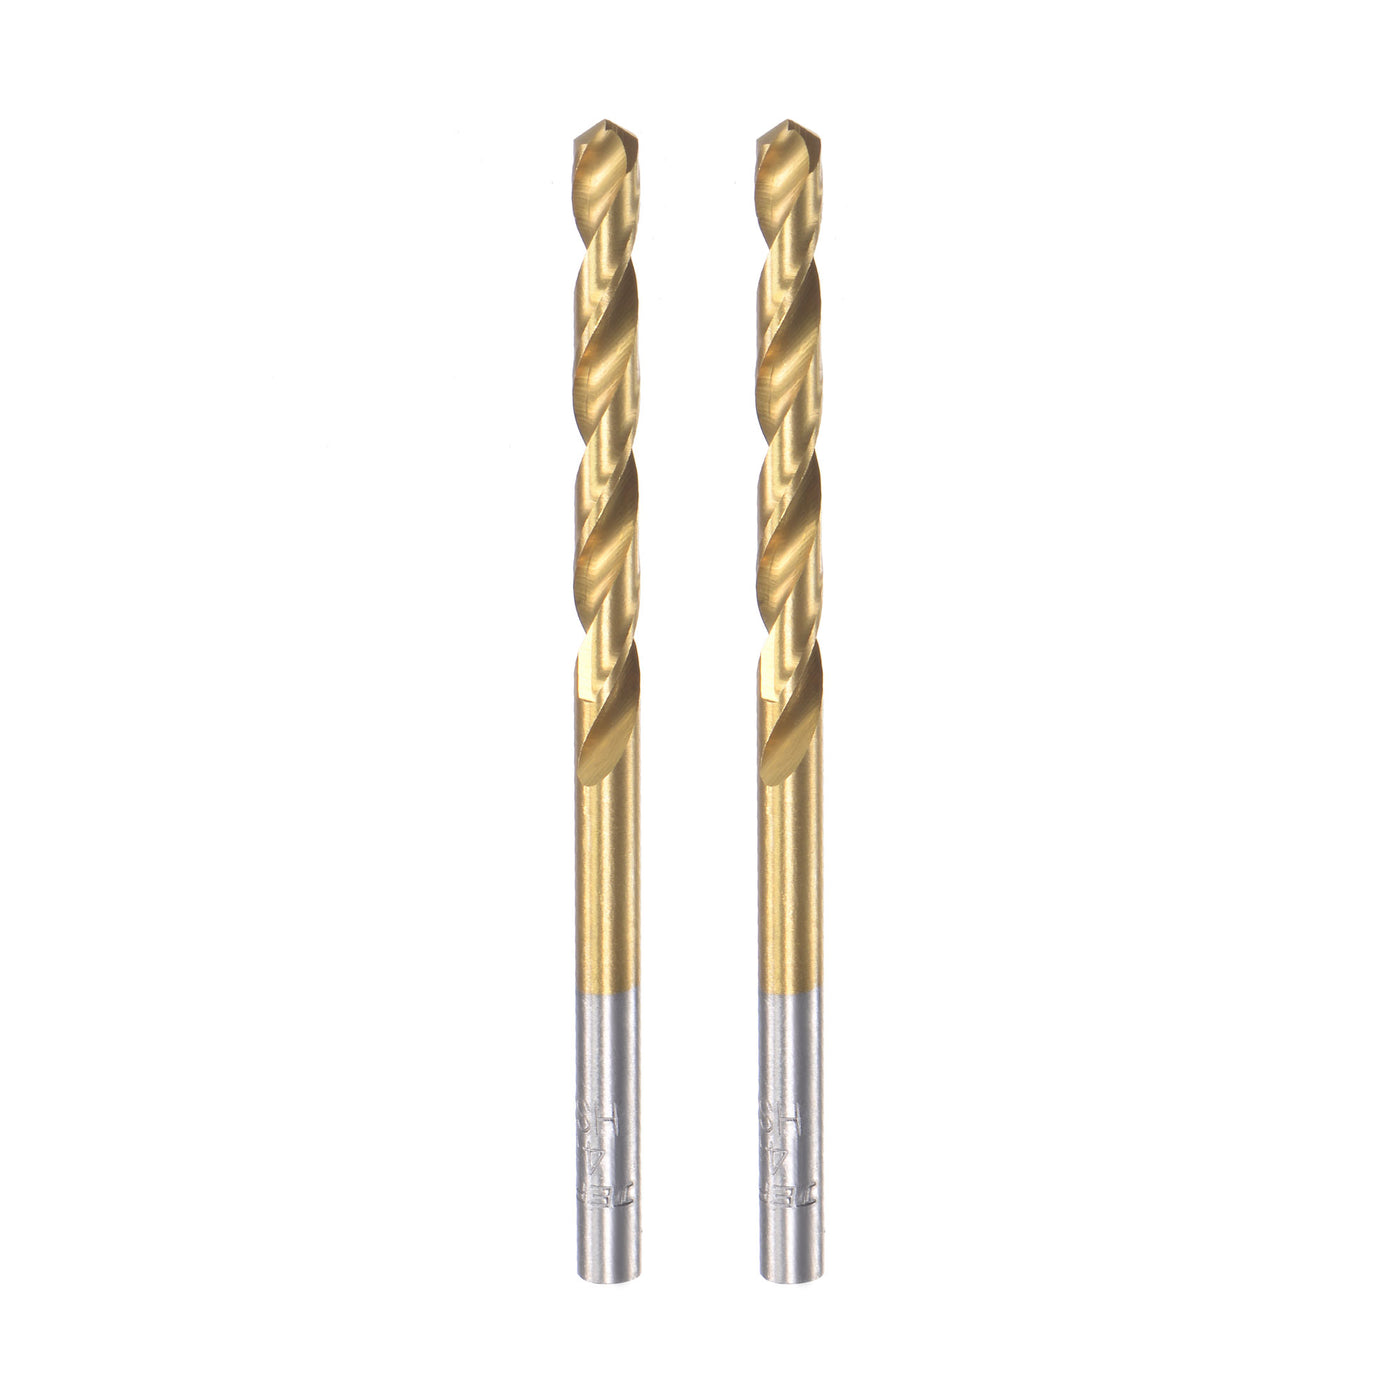 uxcell Uxcell High Speed Steel Twist Drill Bit 4.1mm Fully Ground Titanium Coated 2 Pcs